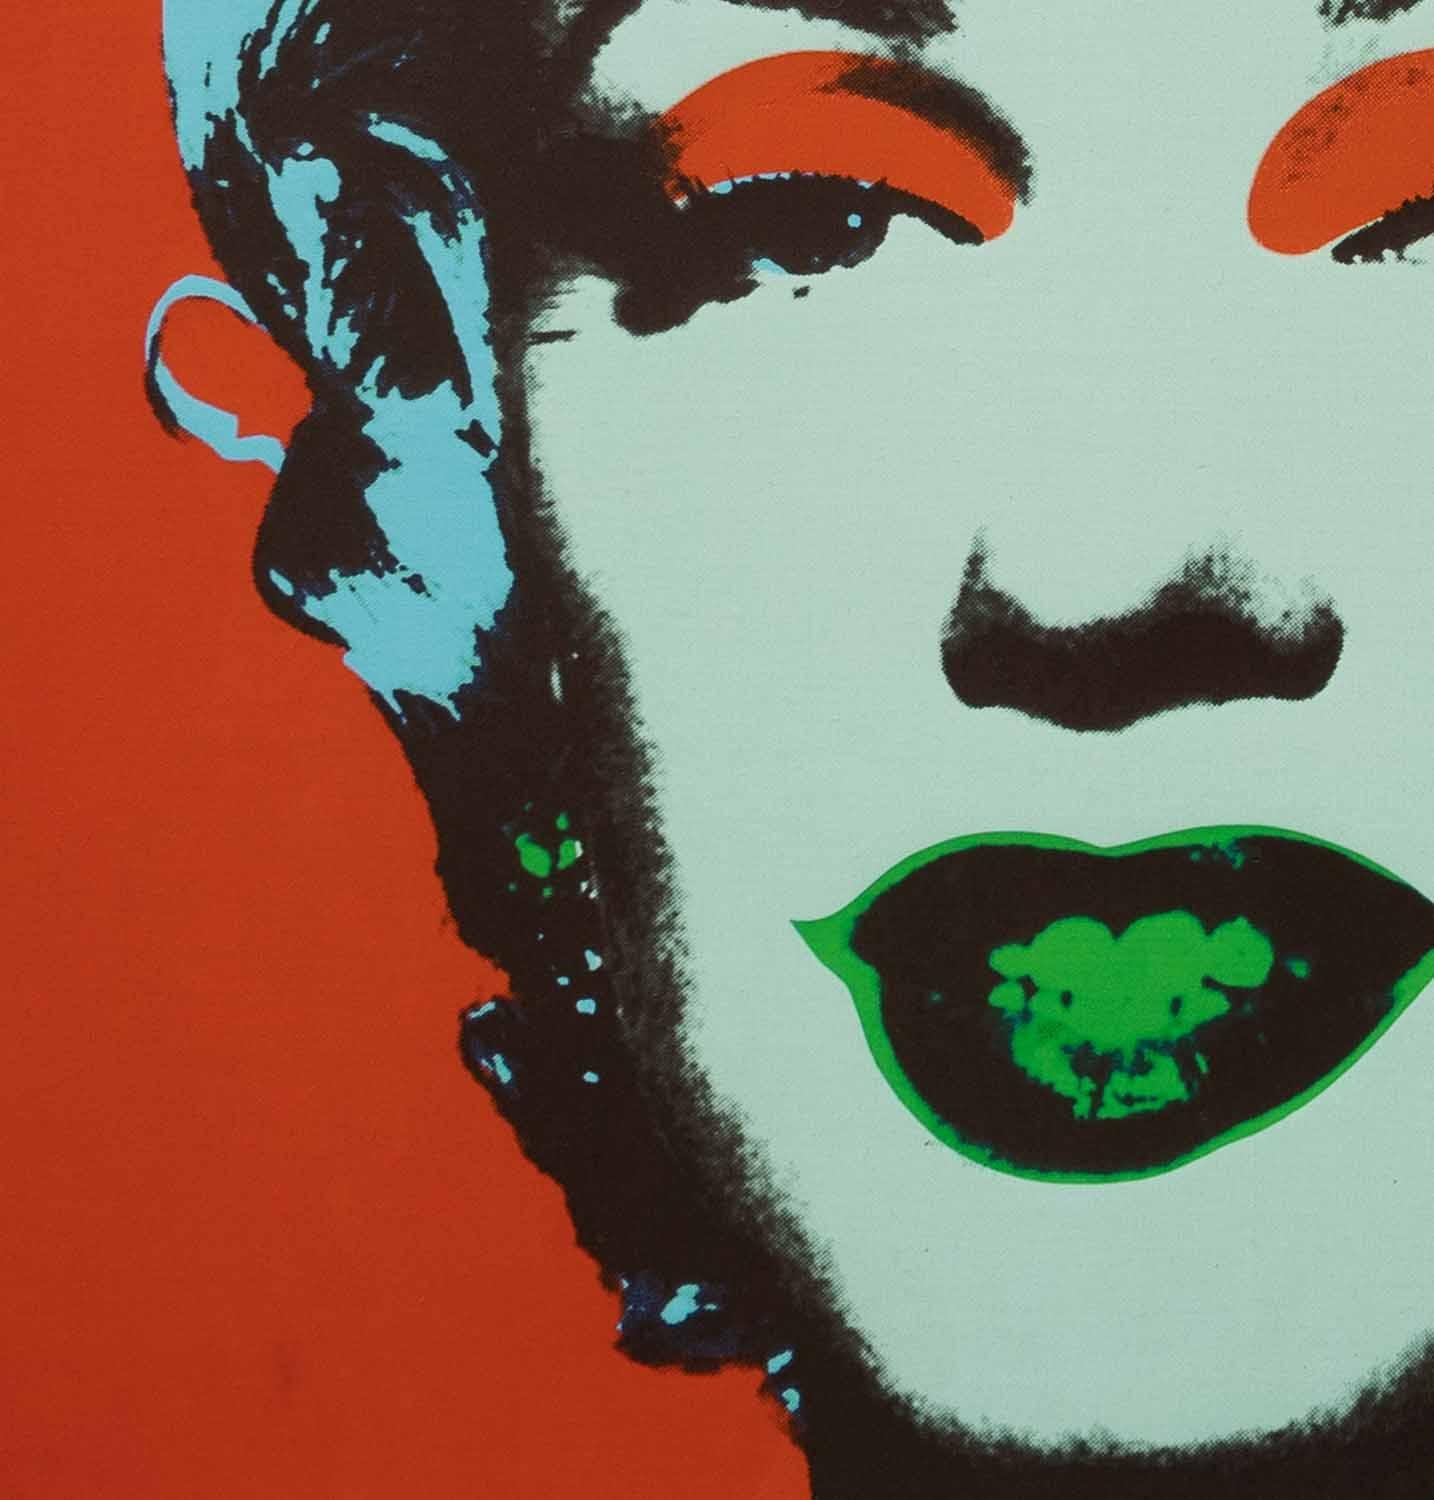 Artwork by Andy Warhol, Marilyn, Made of Giclee Print on linen